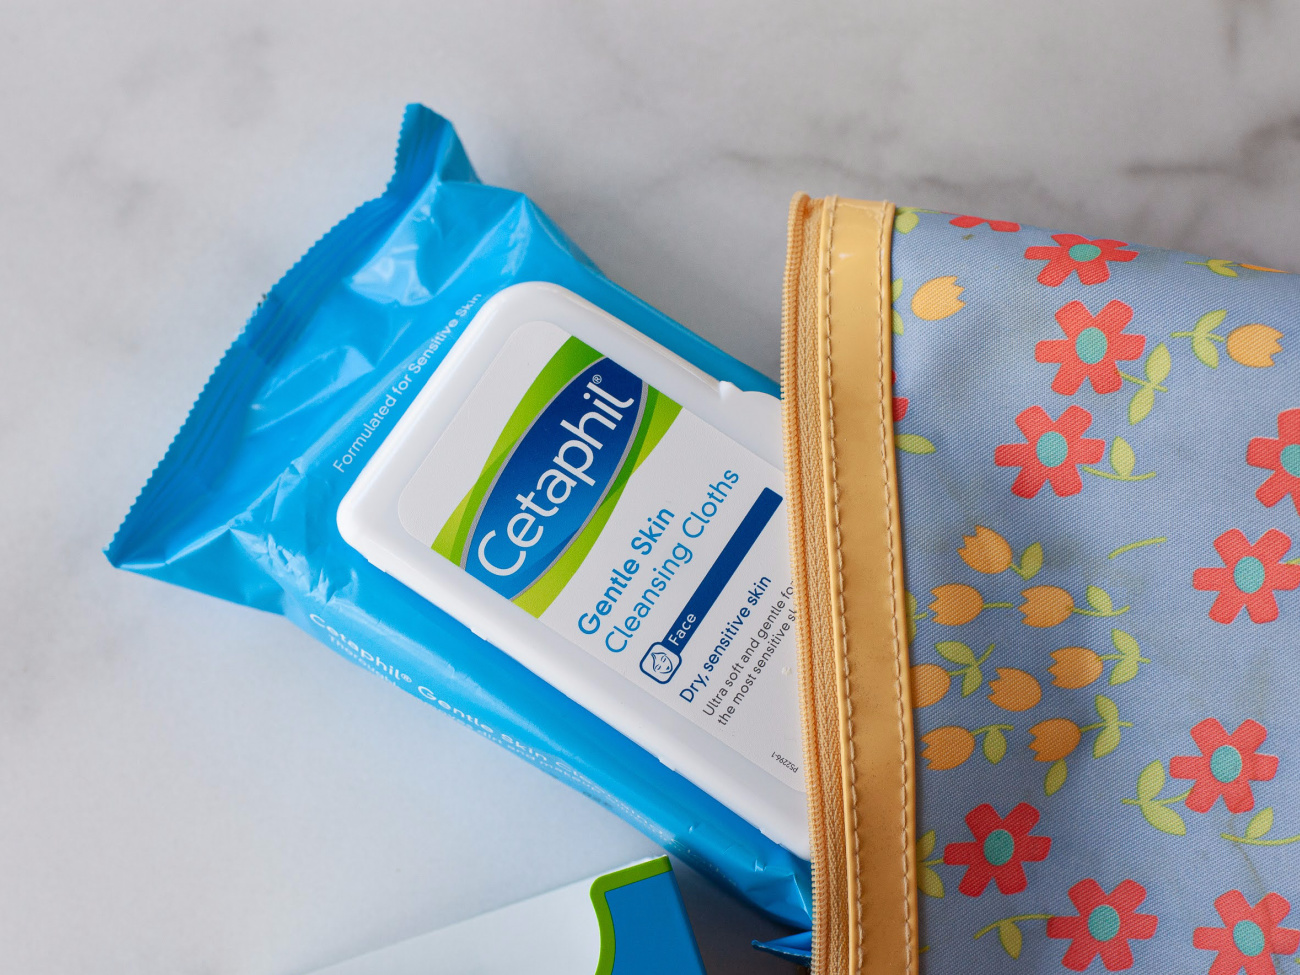 Cetaphil Cleansing Cloths Are As Low As FREE At Publix